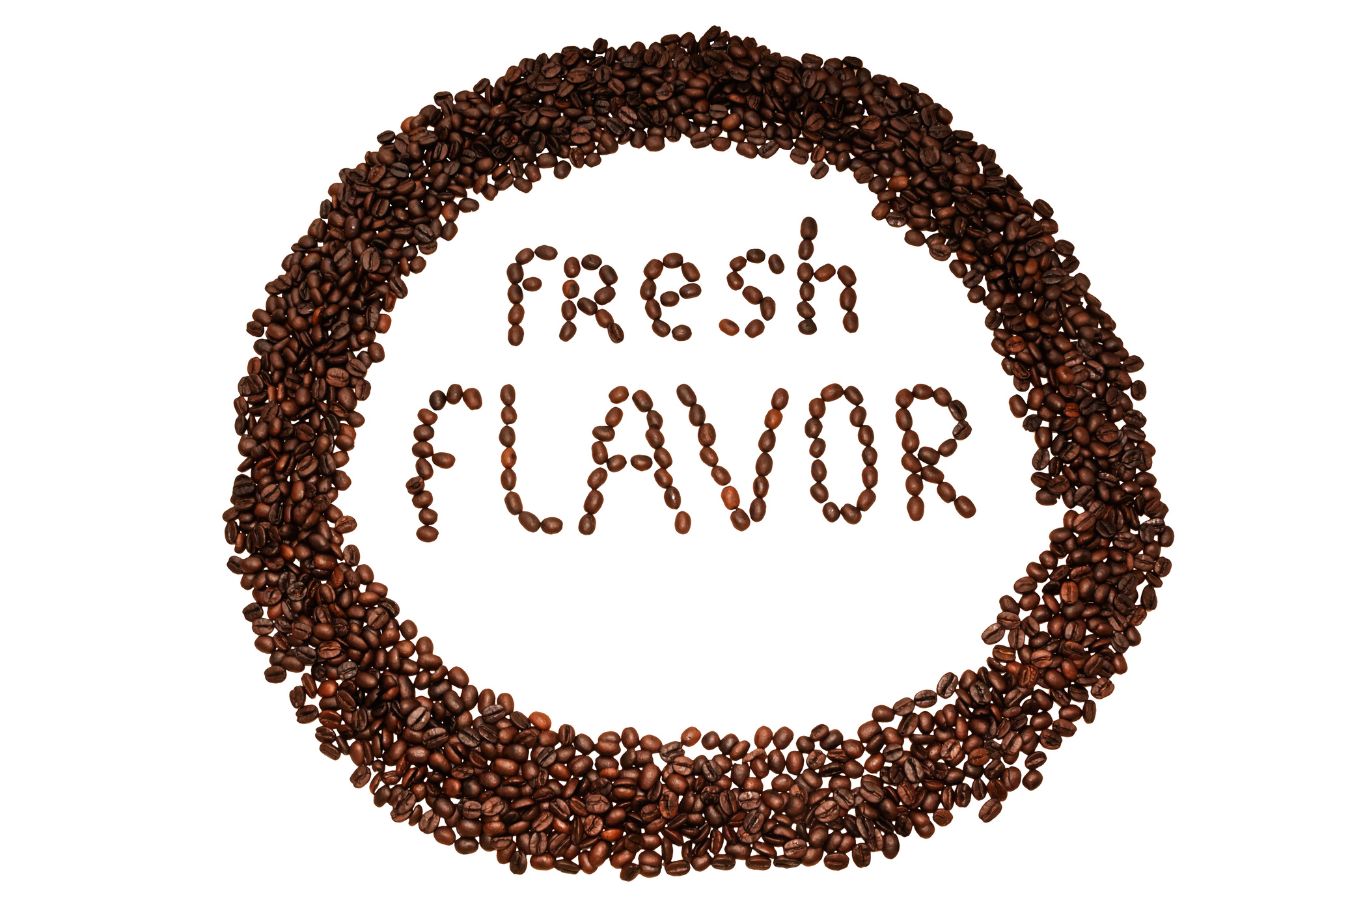 How To Deliciously Flavor Coffee Beans